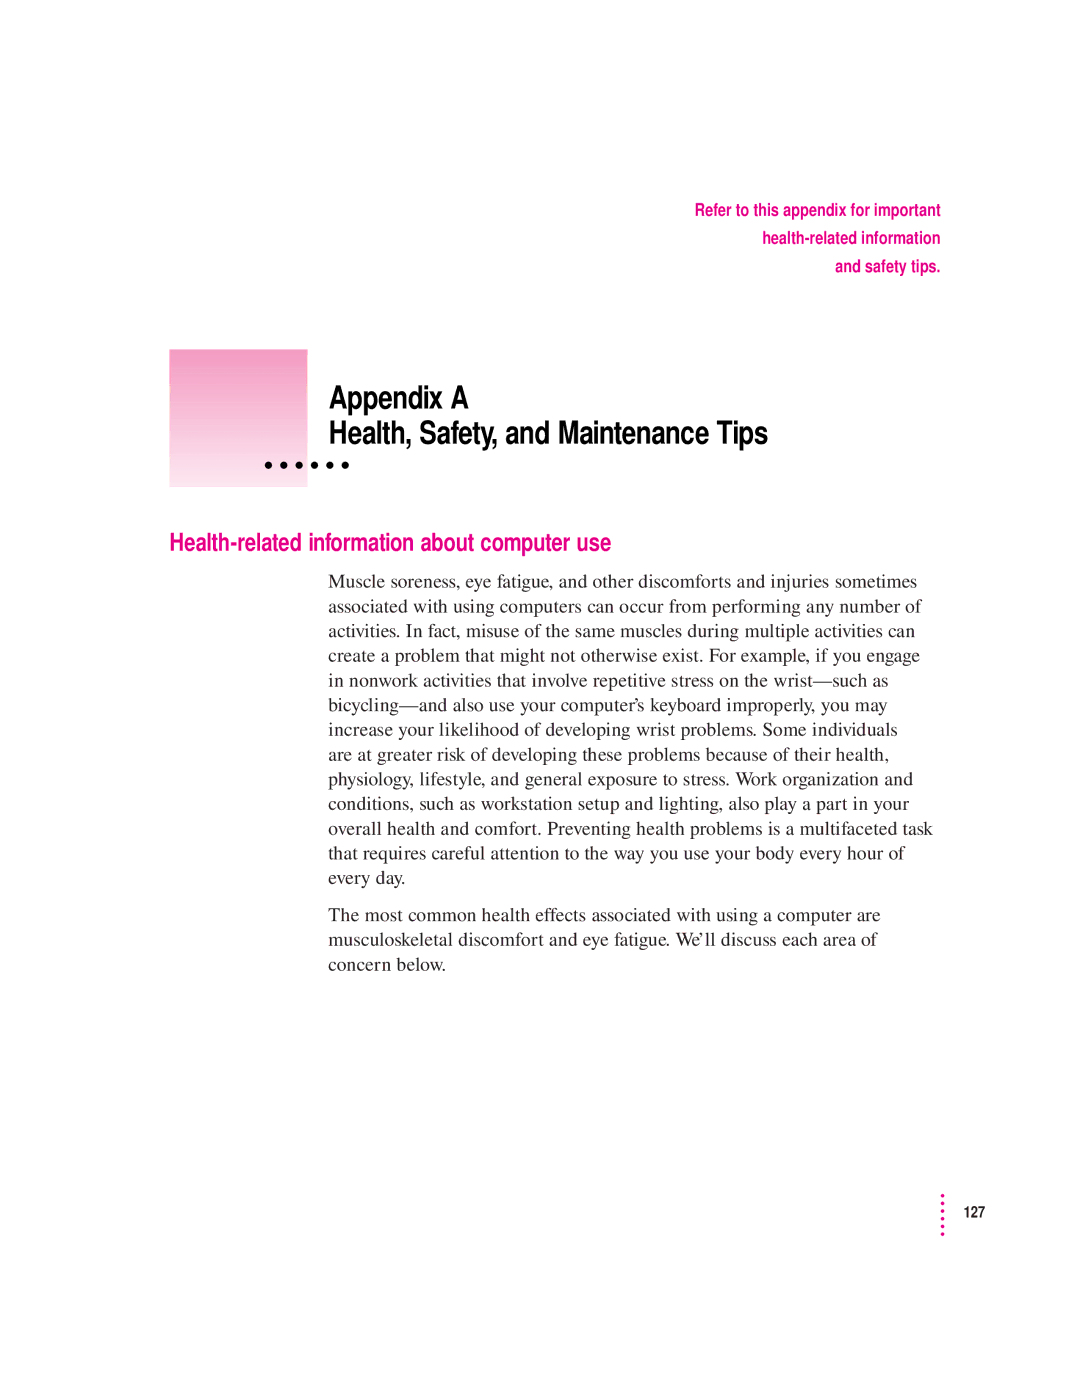 Apple 190 series manual Appendix a Health, Safety, and Maintenance Tips, Health-related information about computer use 